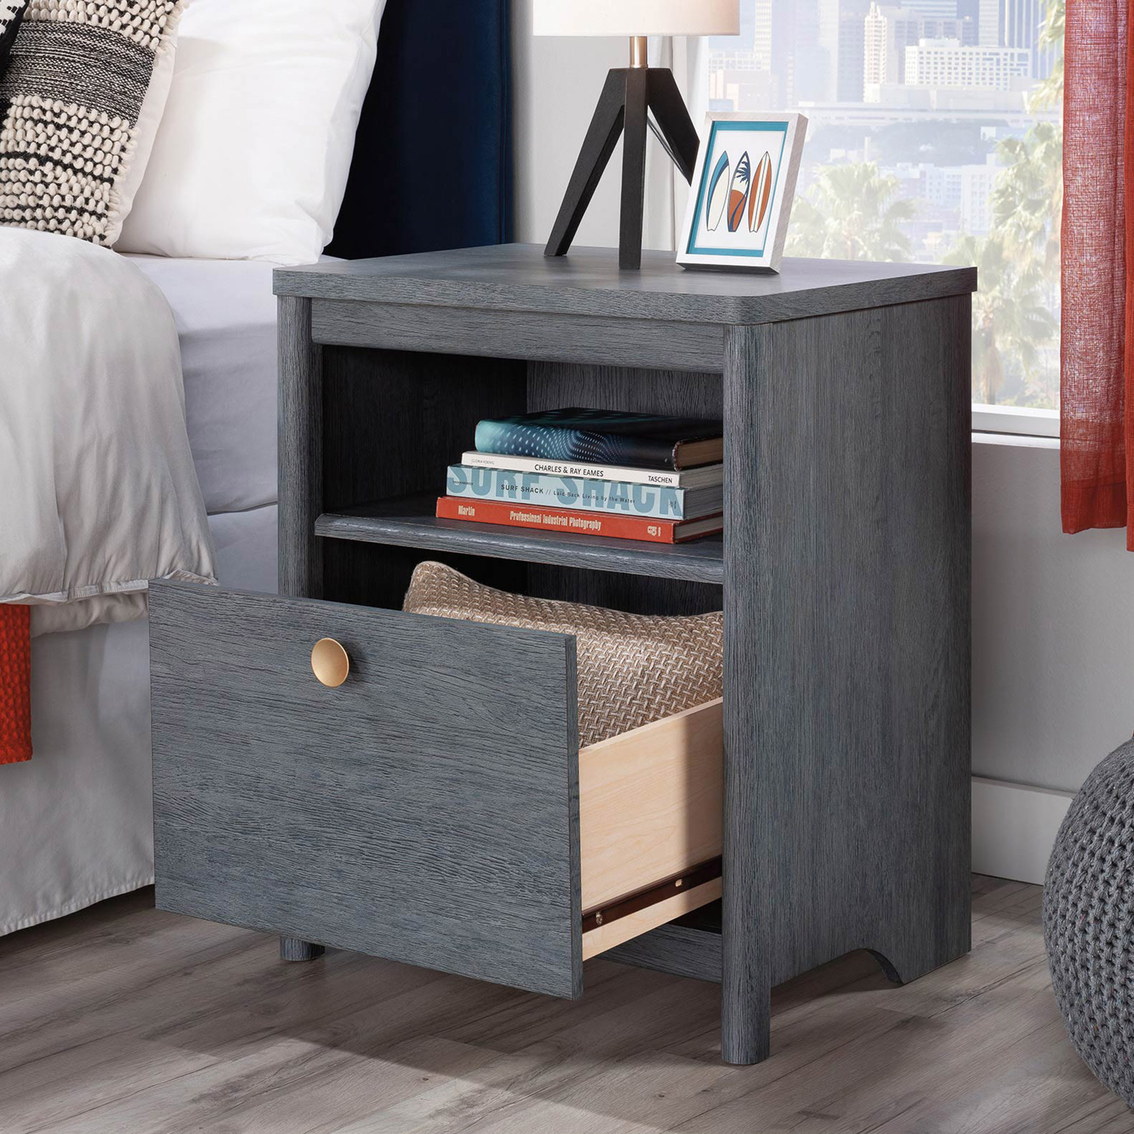 Sauder Night Stand with Drawer in Denim Oak - Image 2 of 8